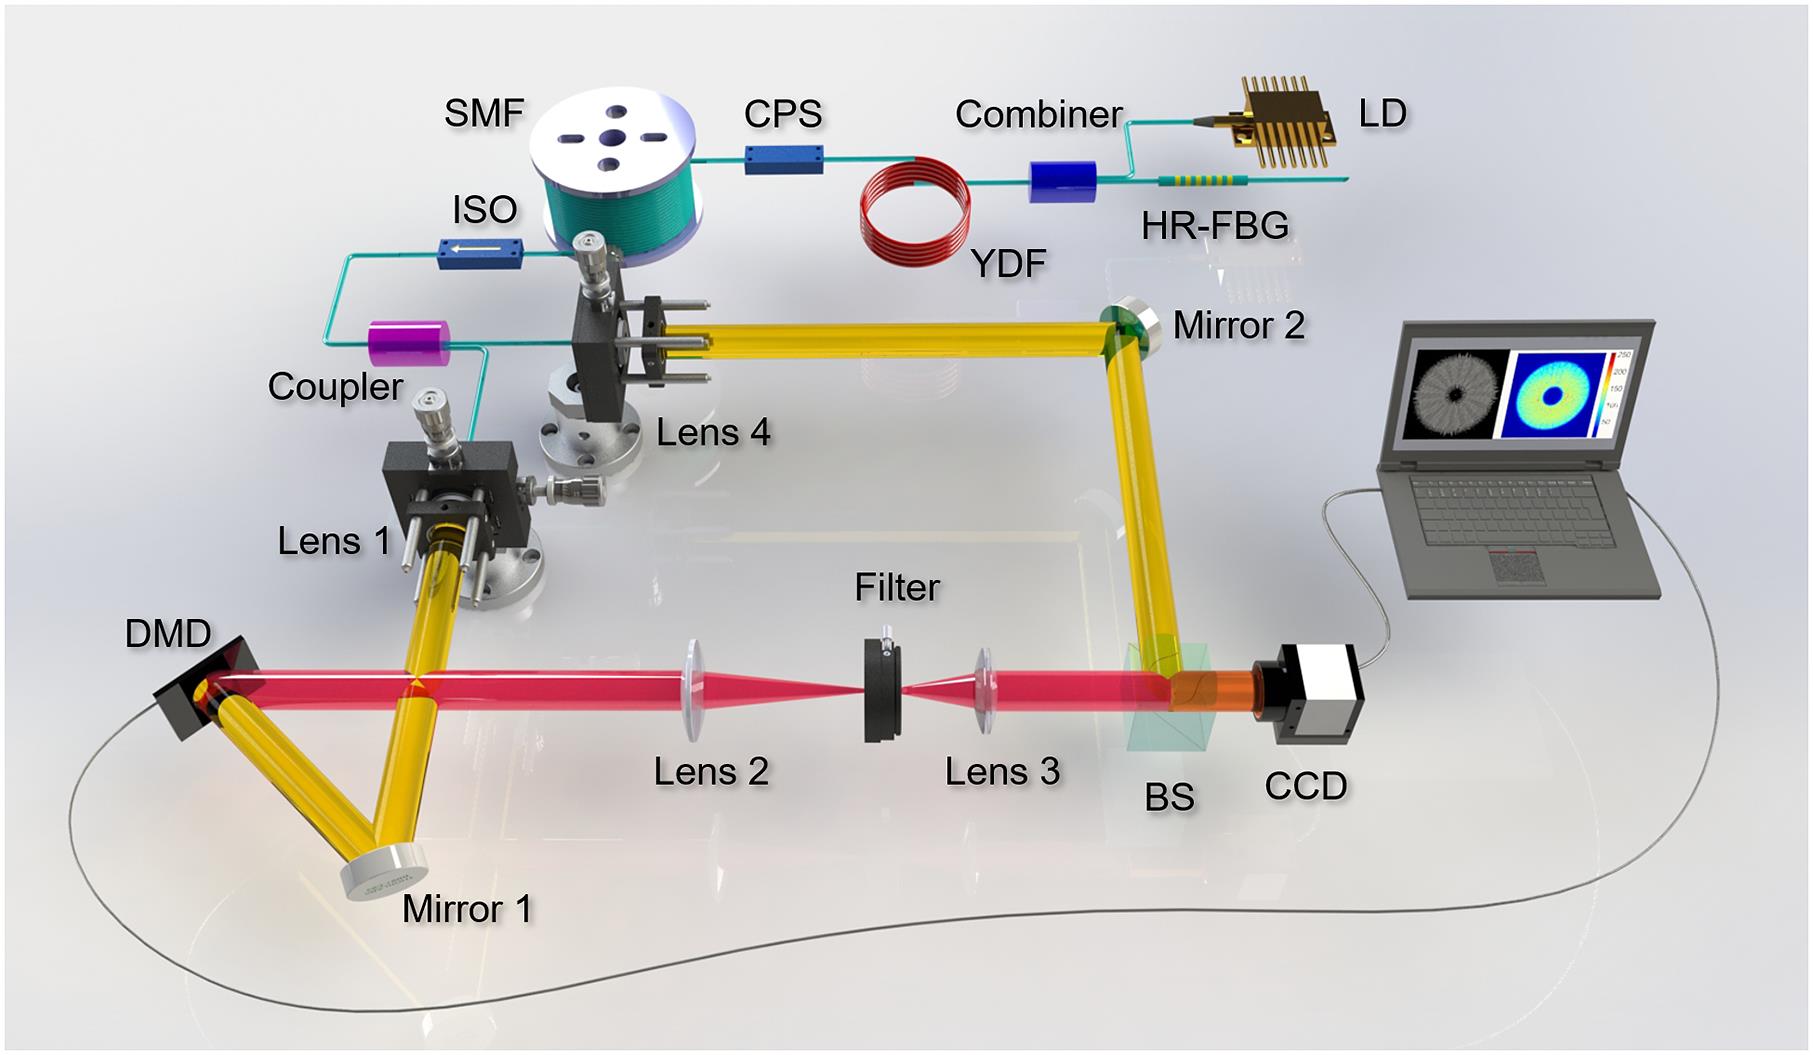 Schematic diagram of the PVB generation and the corresponding characterization sections. LD, laser diode; HR-FBG, high-reflectivity fiber Bragg grating; YDF, ytterbium-doped fiber; CPS, cladding power stripper; SMF, single-mode fiber; ISO, isolator; DMD, digital micromirror device; BS, beam splitter; CCD, charge-coupled device.